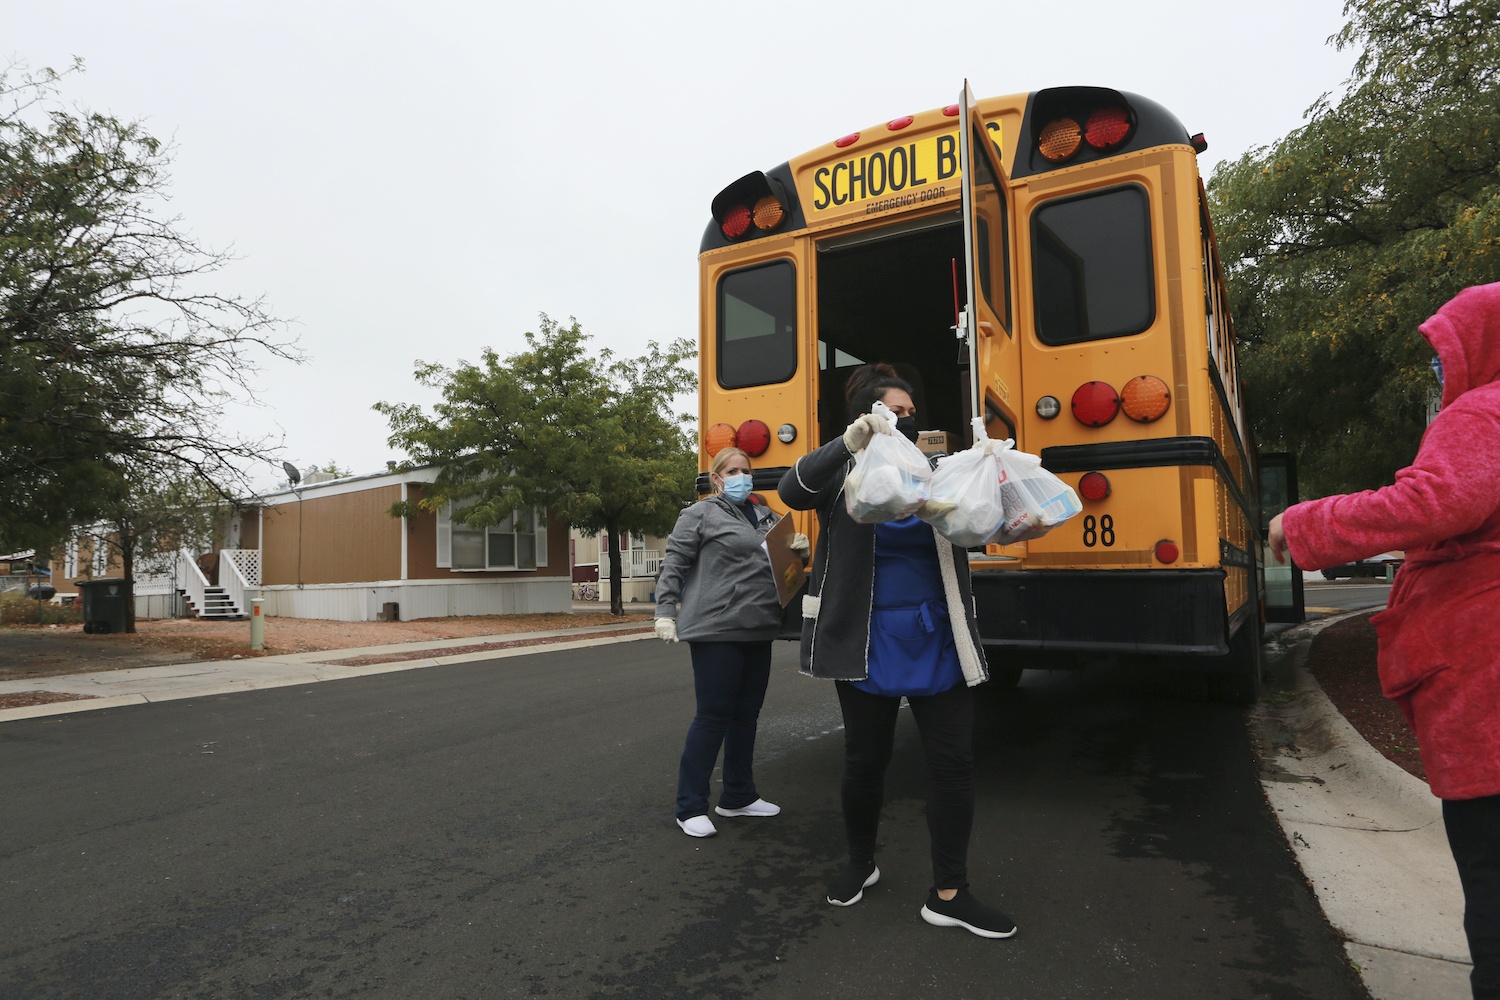 School lunch is unloaded from a school bus during Covid-19. October 2020